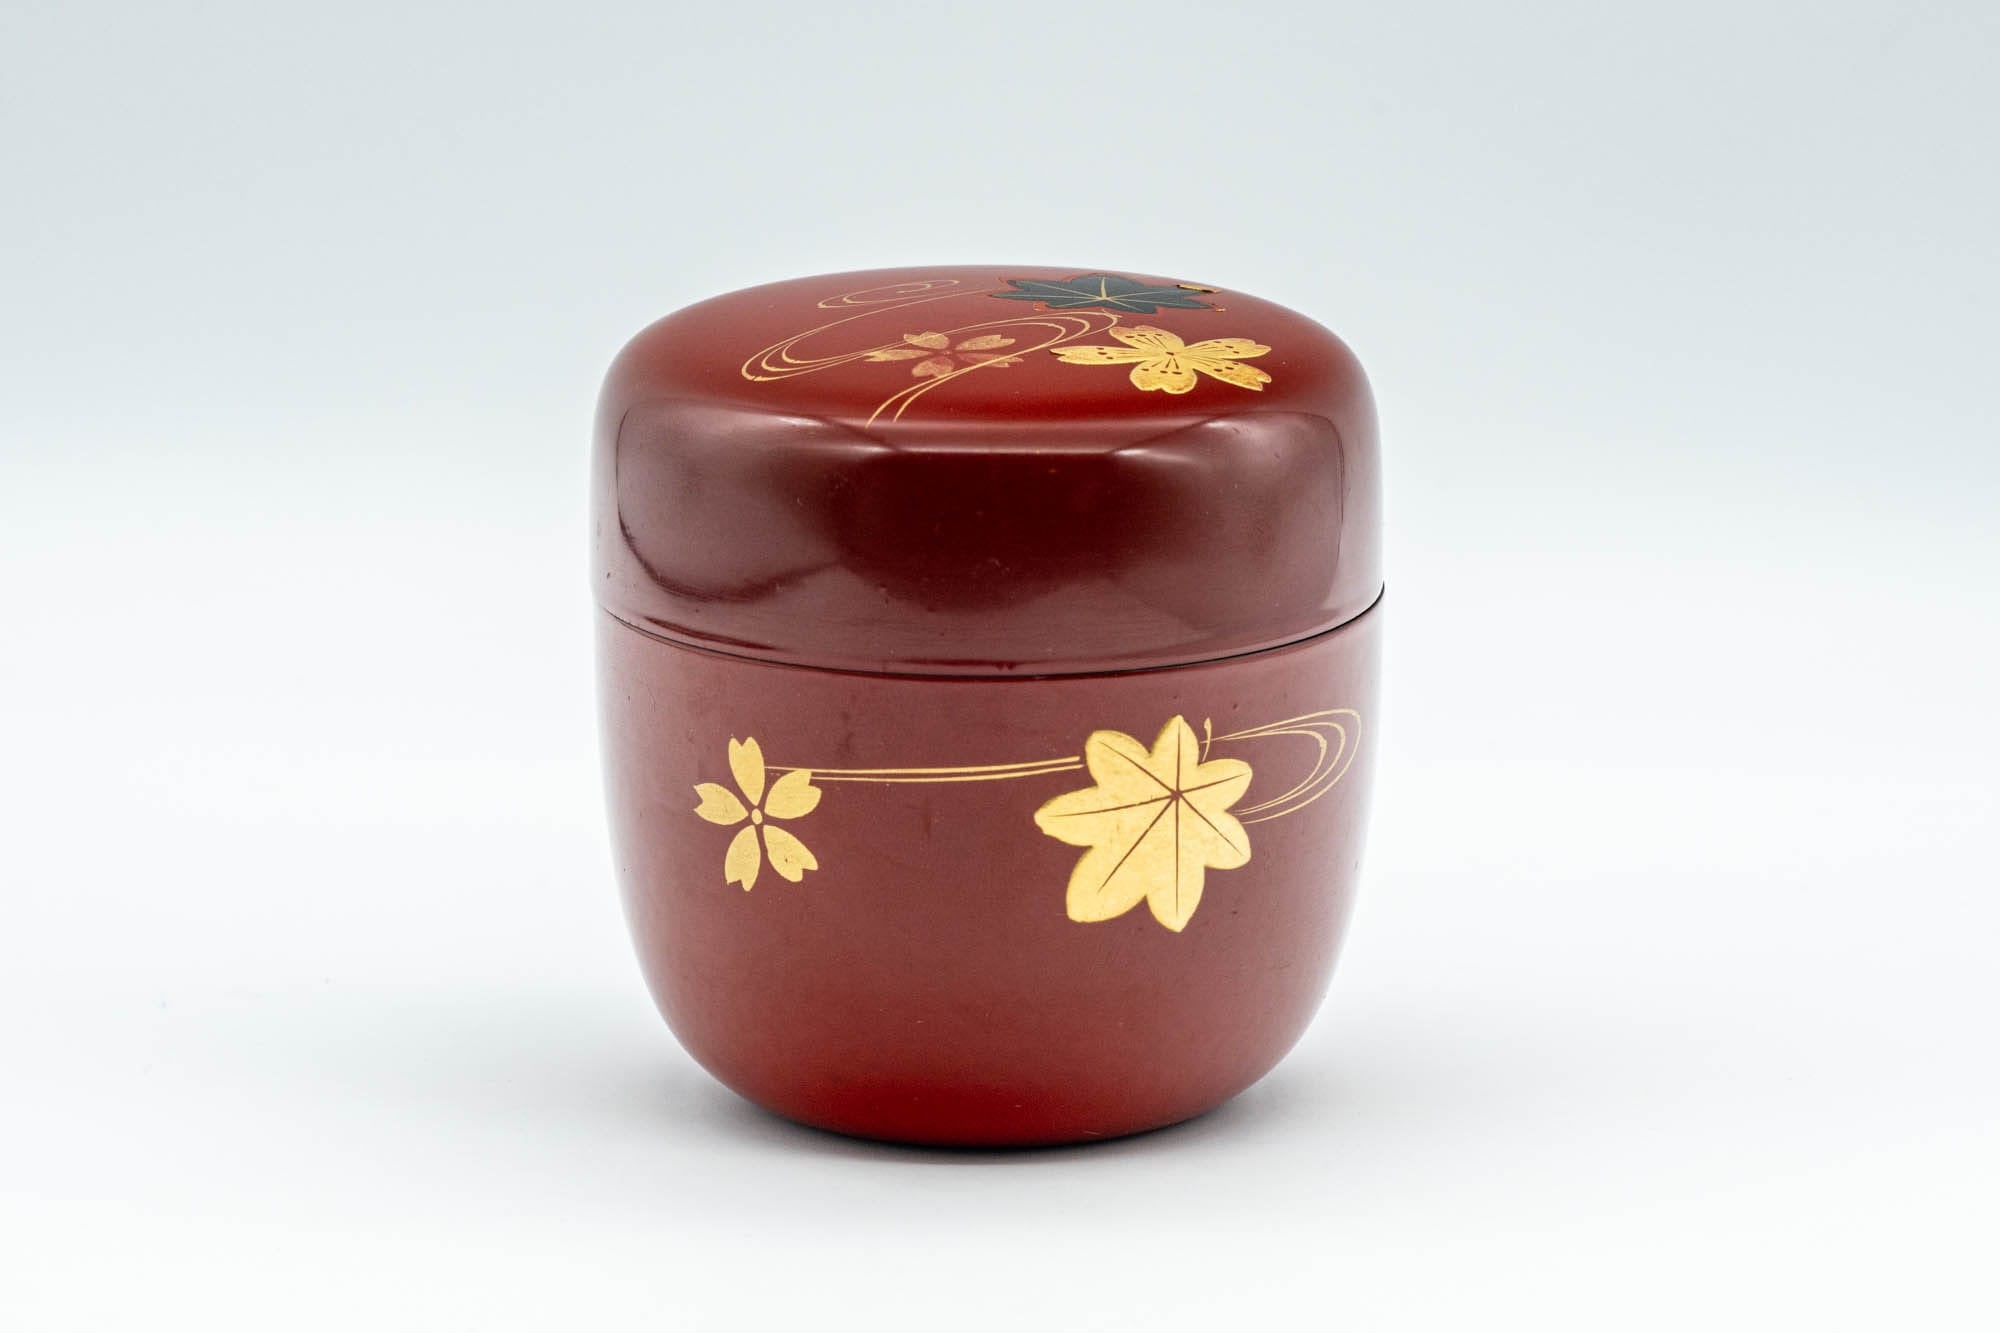 Japanese Natsume - Floral Red Lacquer Matcha Tea Caddy - 100ml